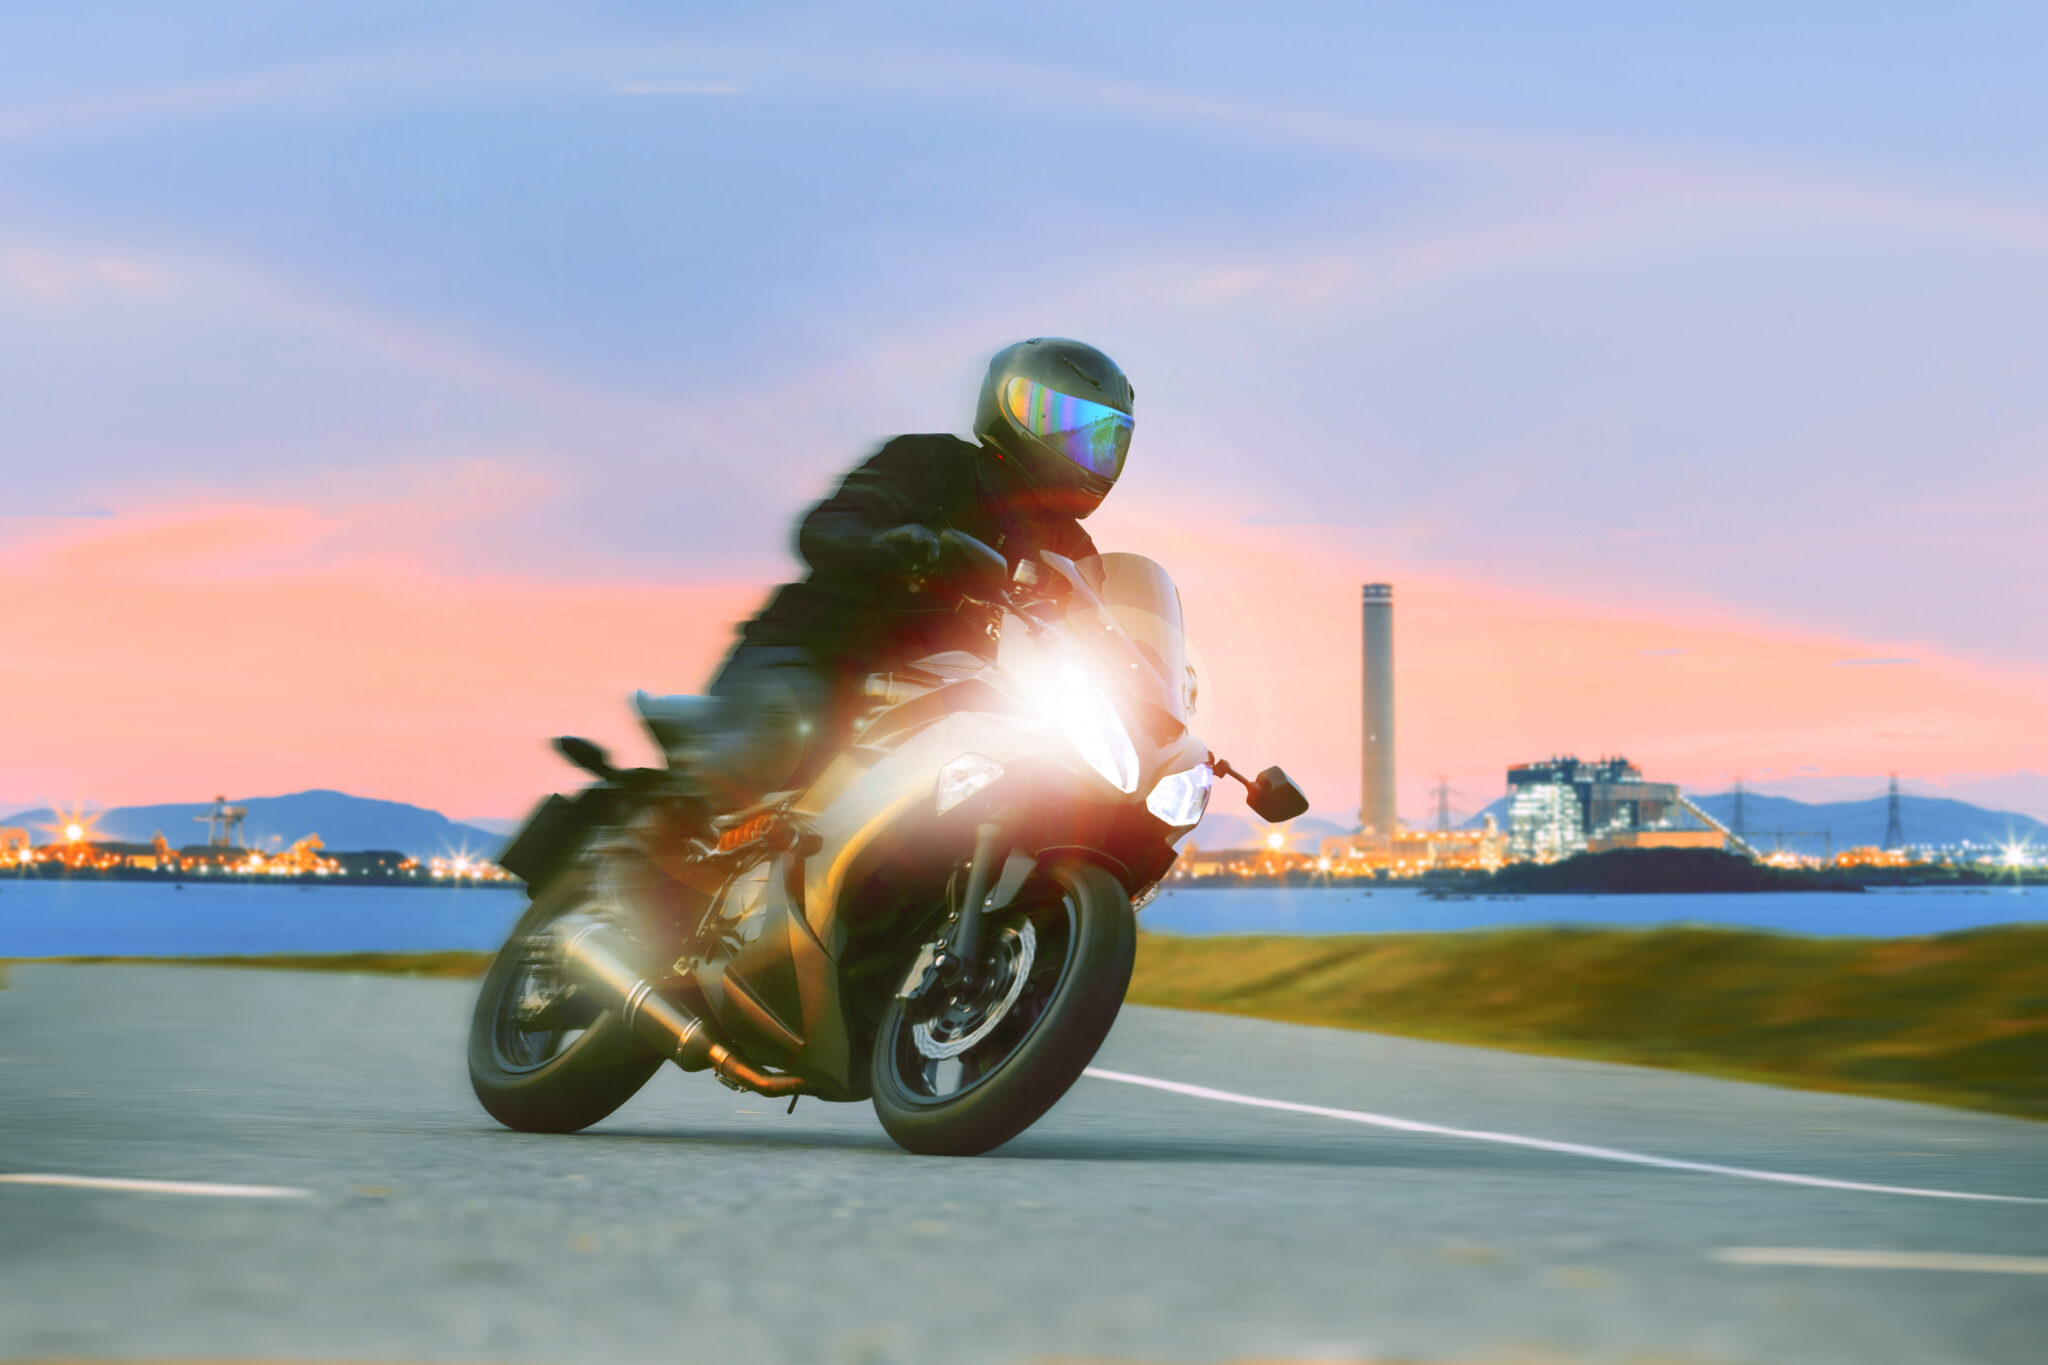 Motorcycle Insurance For New Riders The Best Coverage and Companies